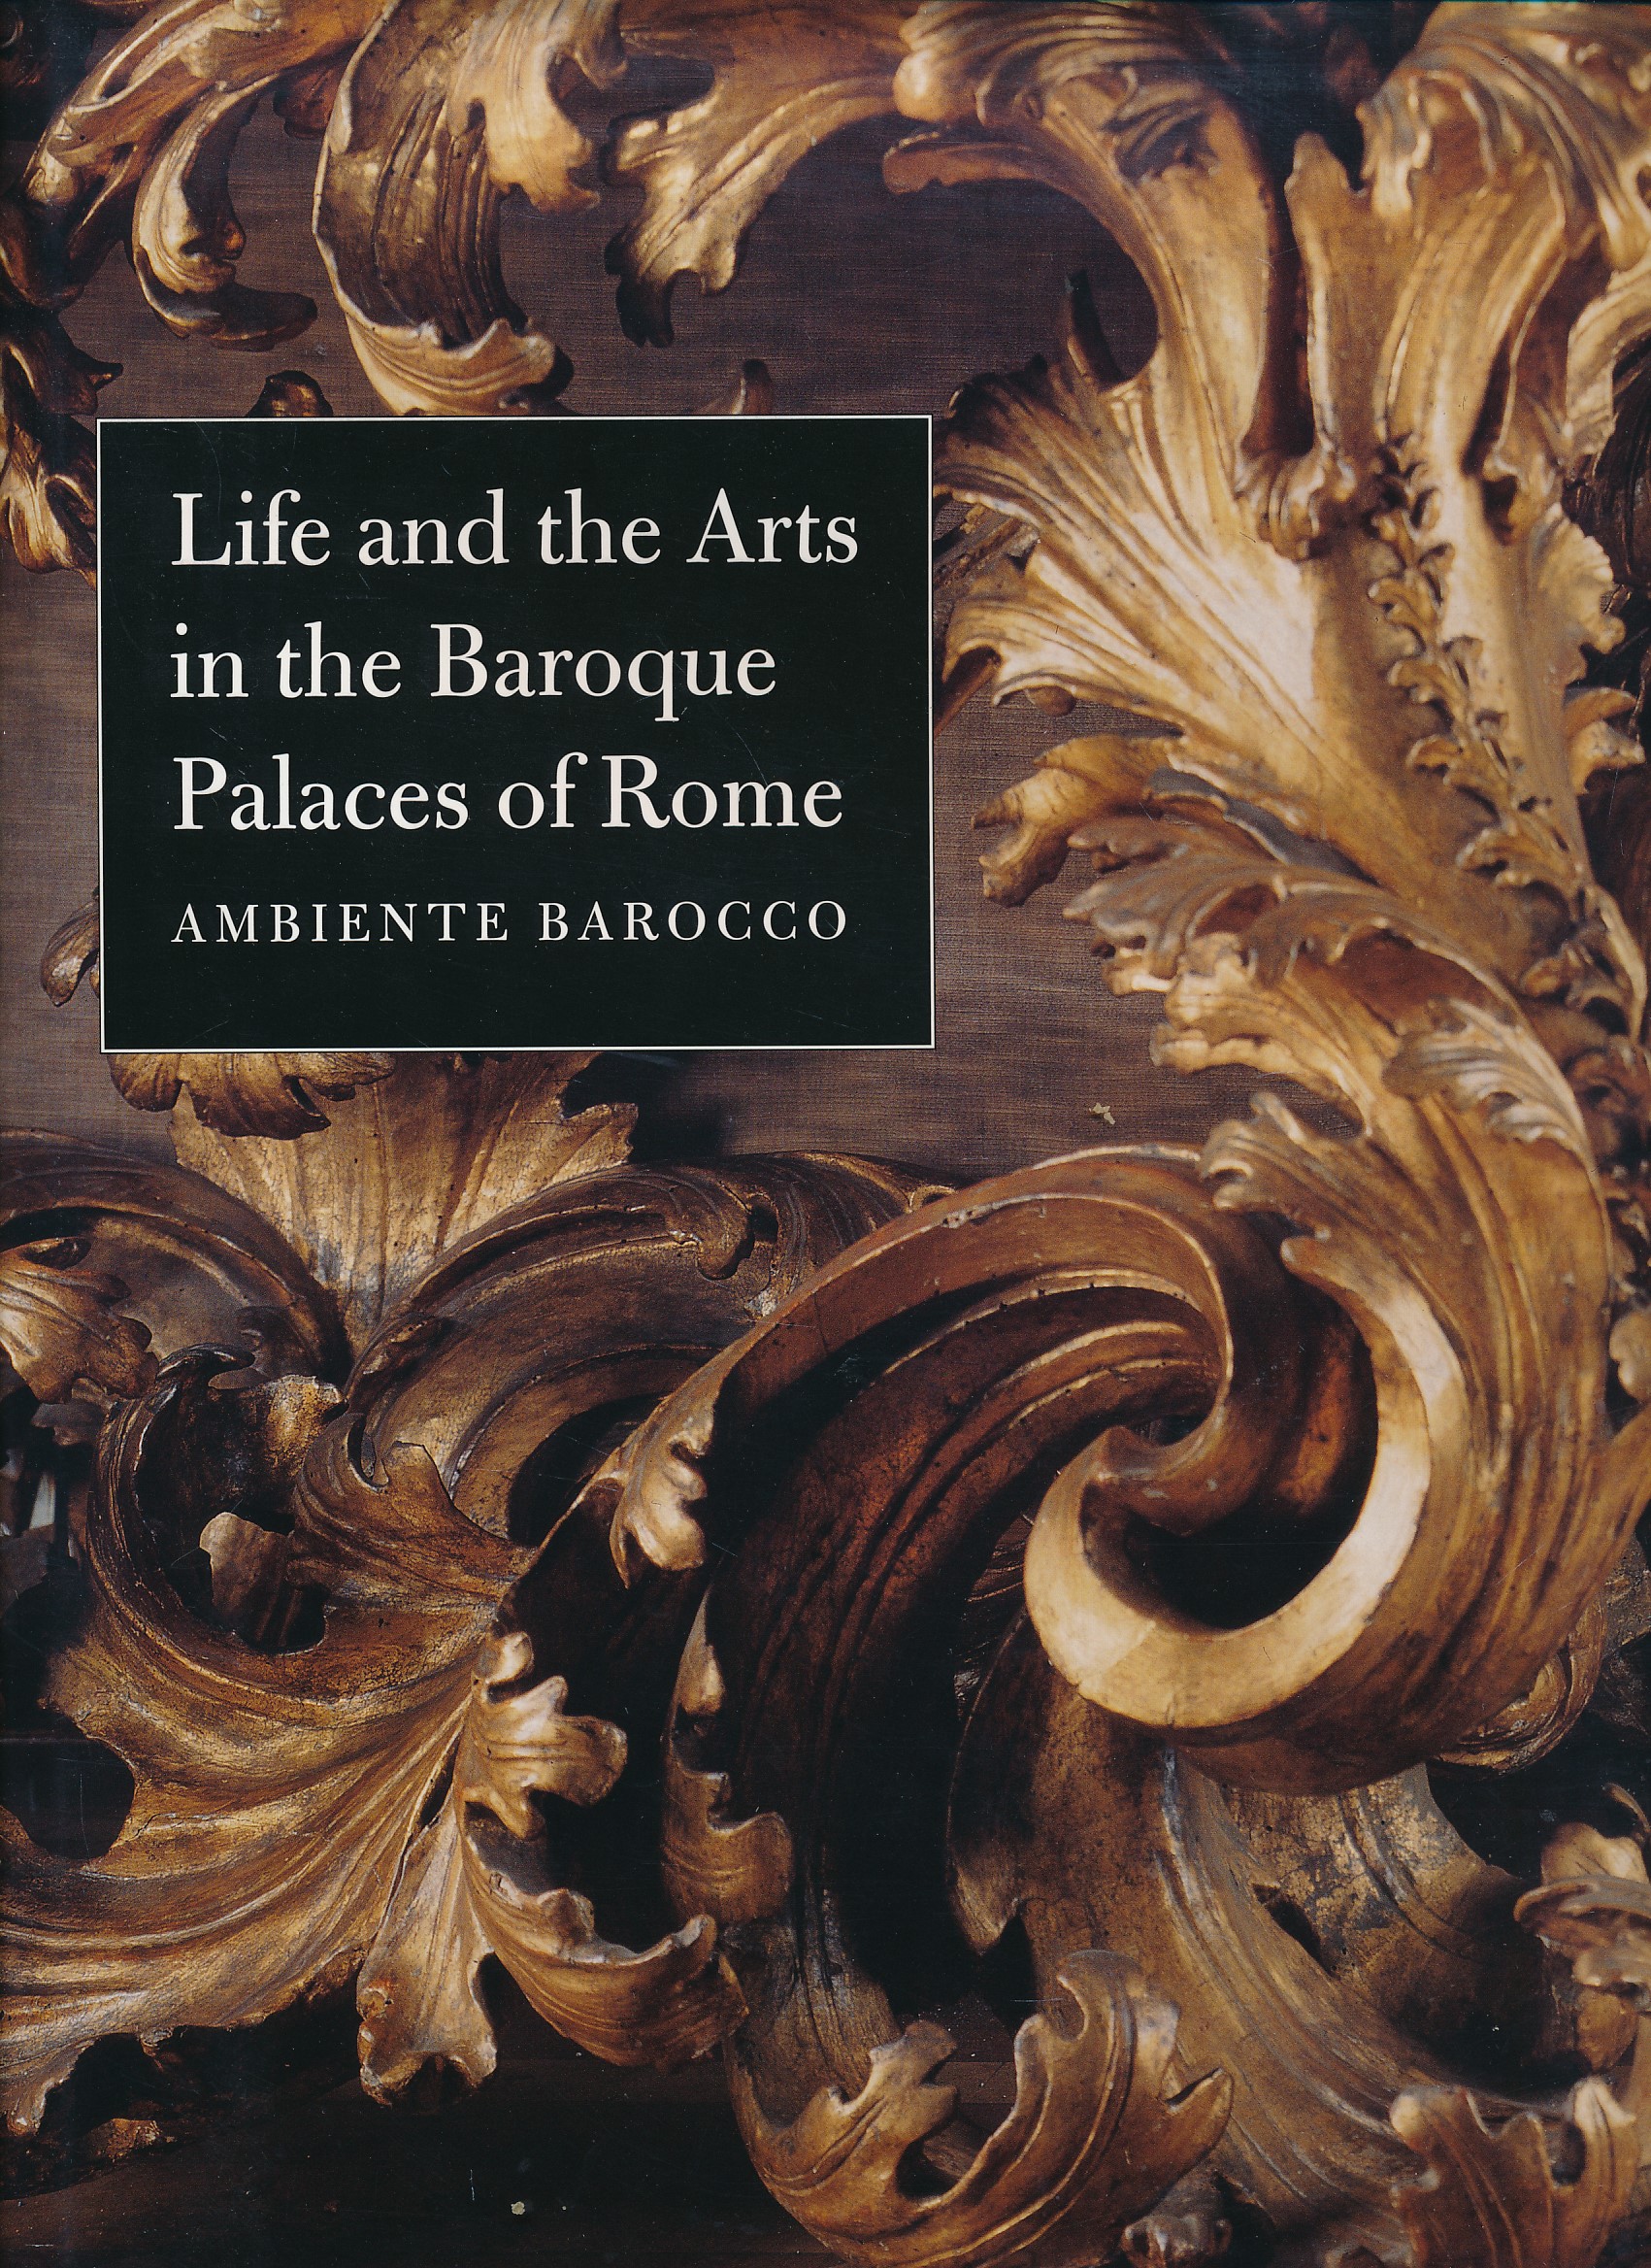 Life and the Arts in the Baroque Palaces of Rome: Ambiente Barocco